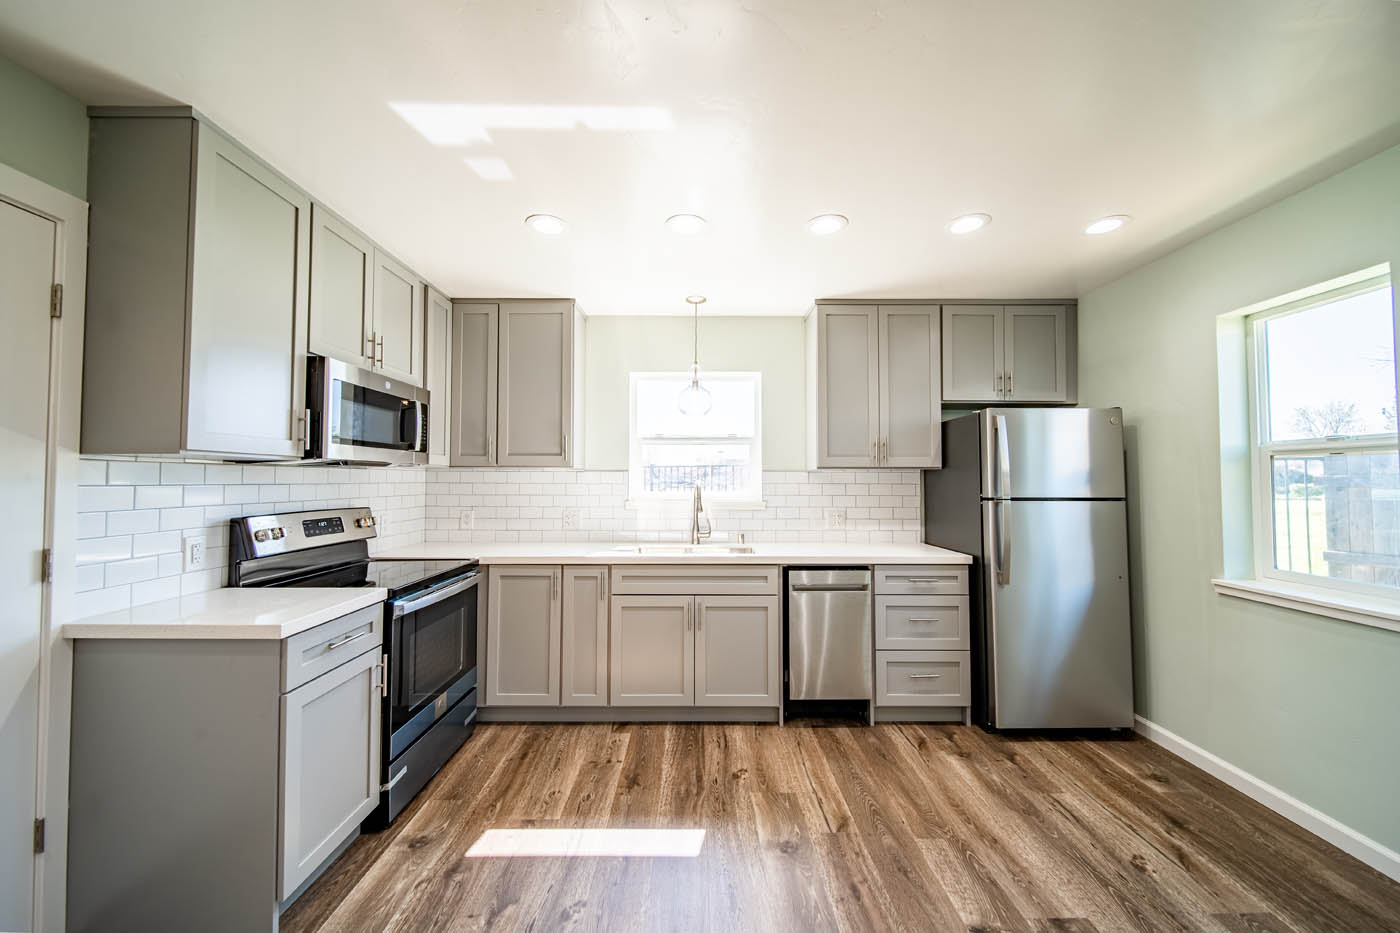 Anchored Tiny Homes Boise ADU Gallery: 2-Bedroom ADUs. - 7